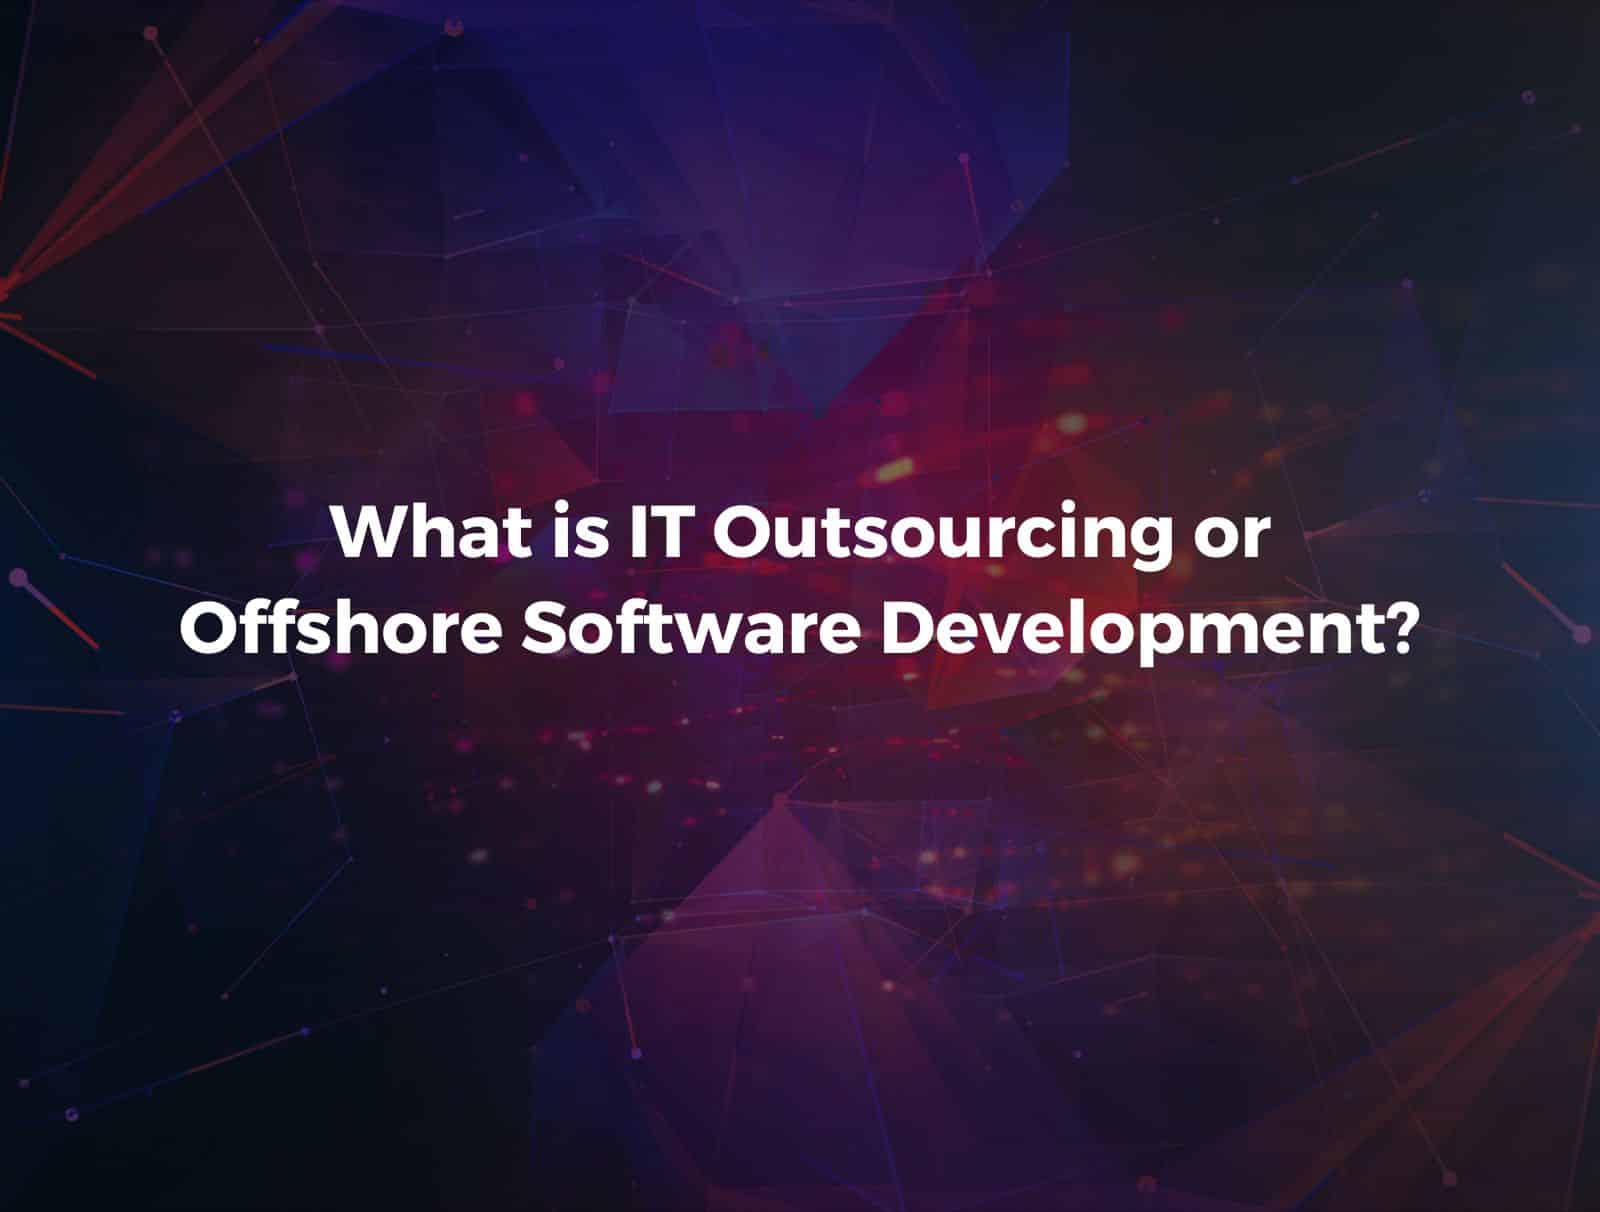 What is IT Outsourcing and Offshore Software Development